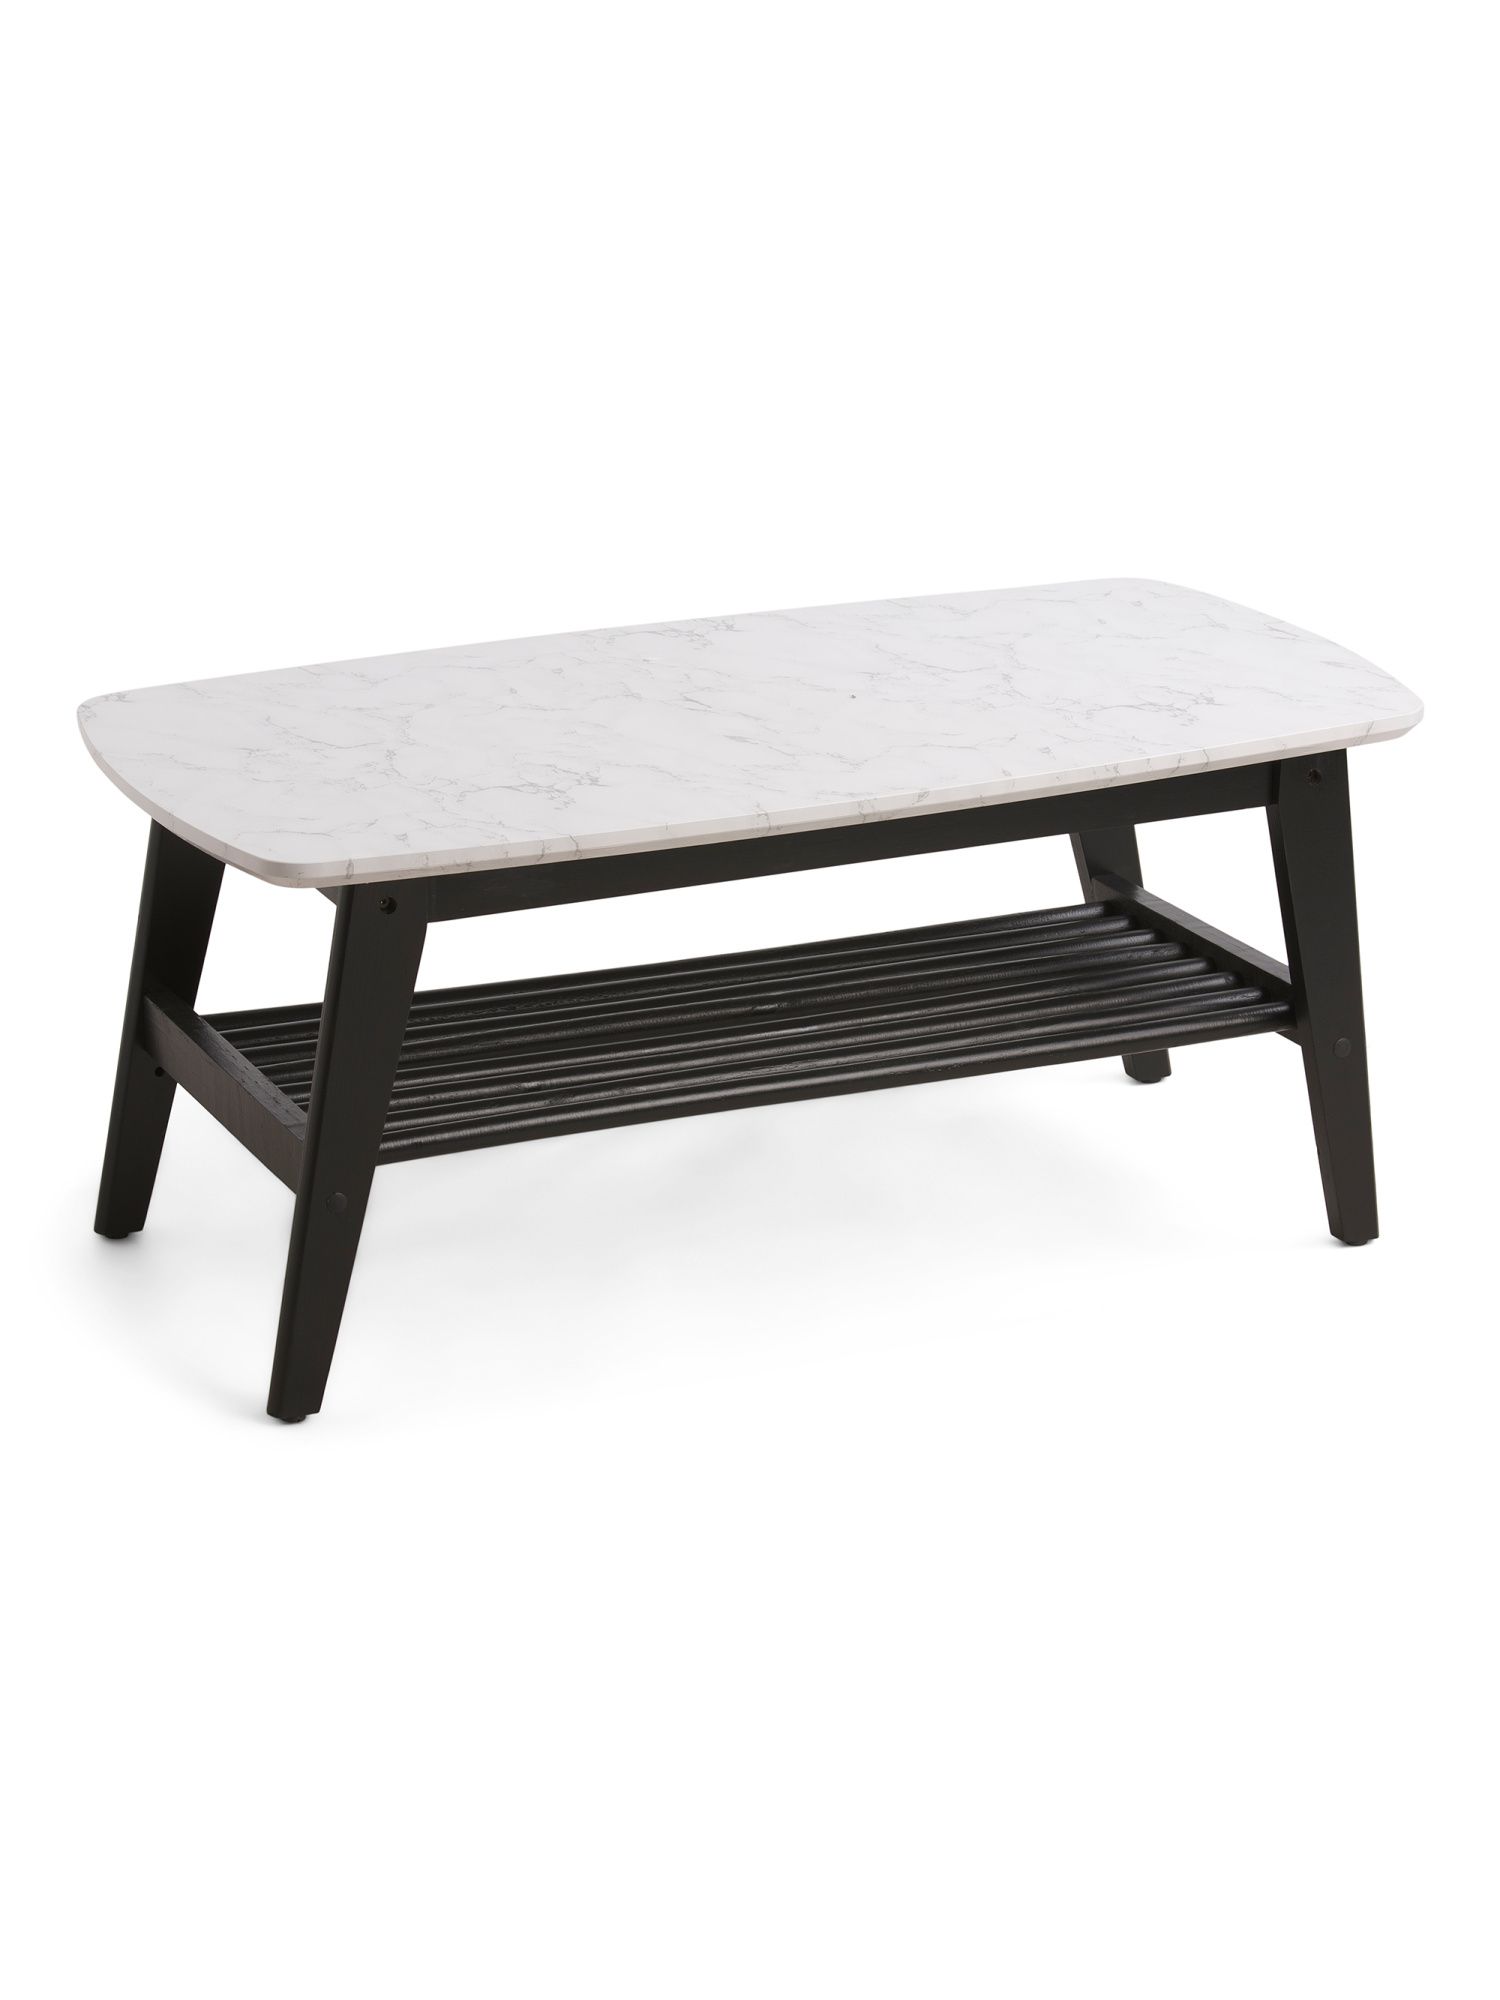 Birchwood Coffee Table With Marbled Look Top | TJ Maxx